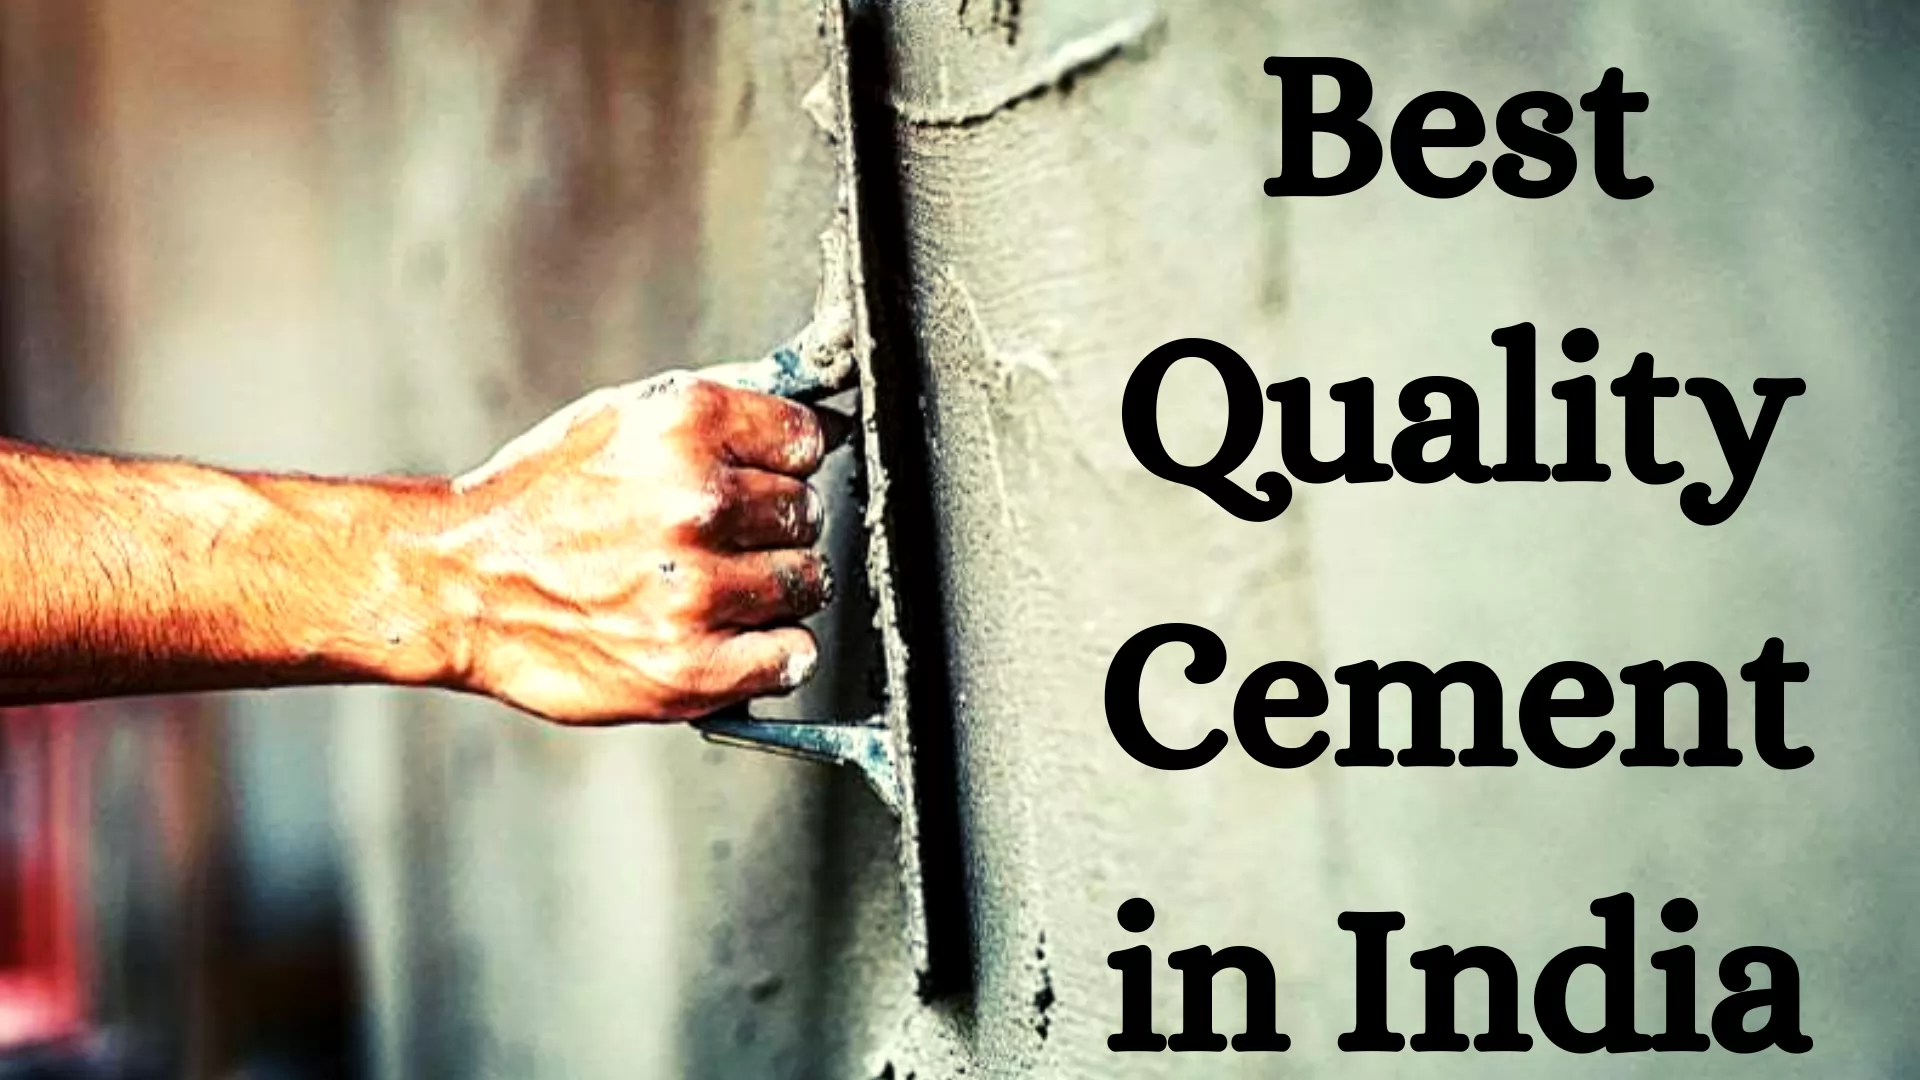 Best Quality Cement in India